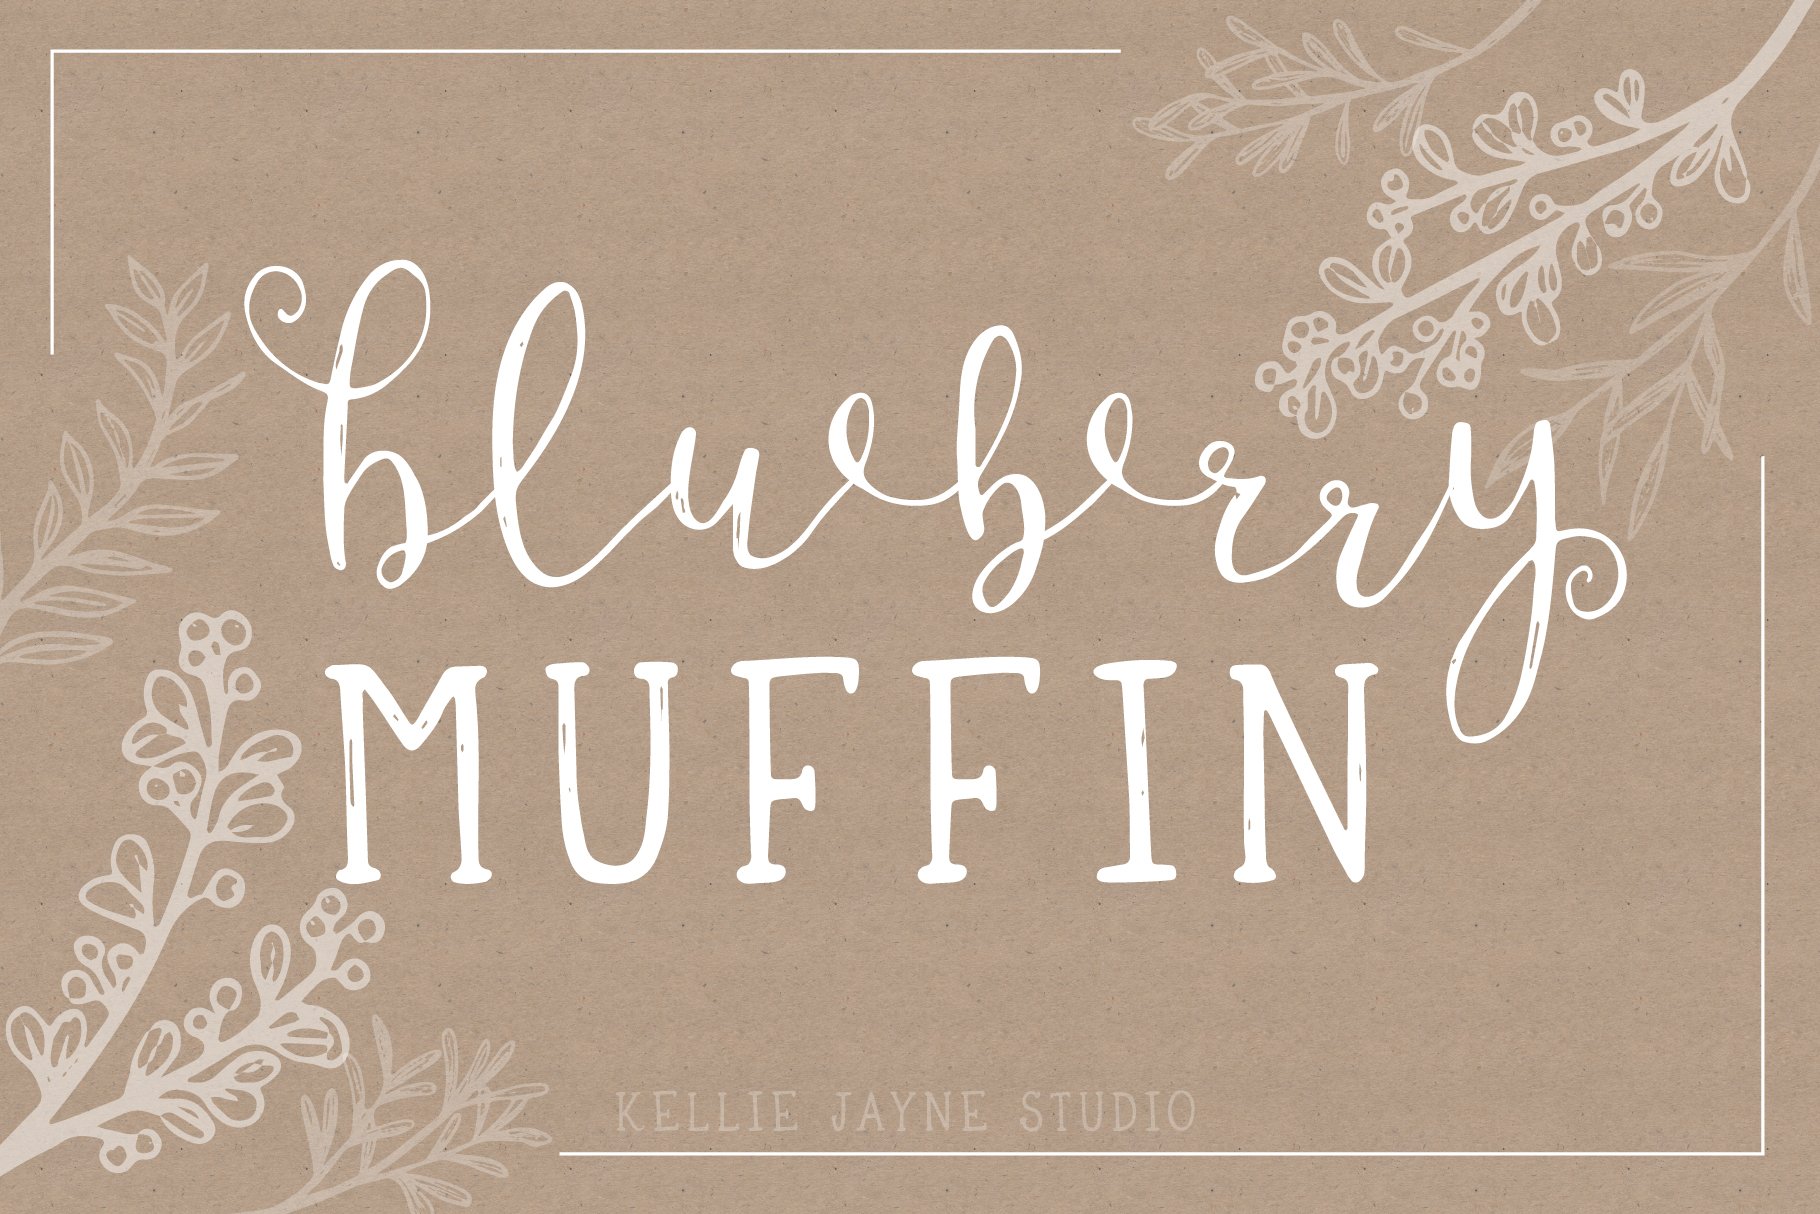 Blueberry Muffin Handwritten Font cover image.